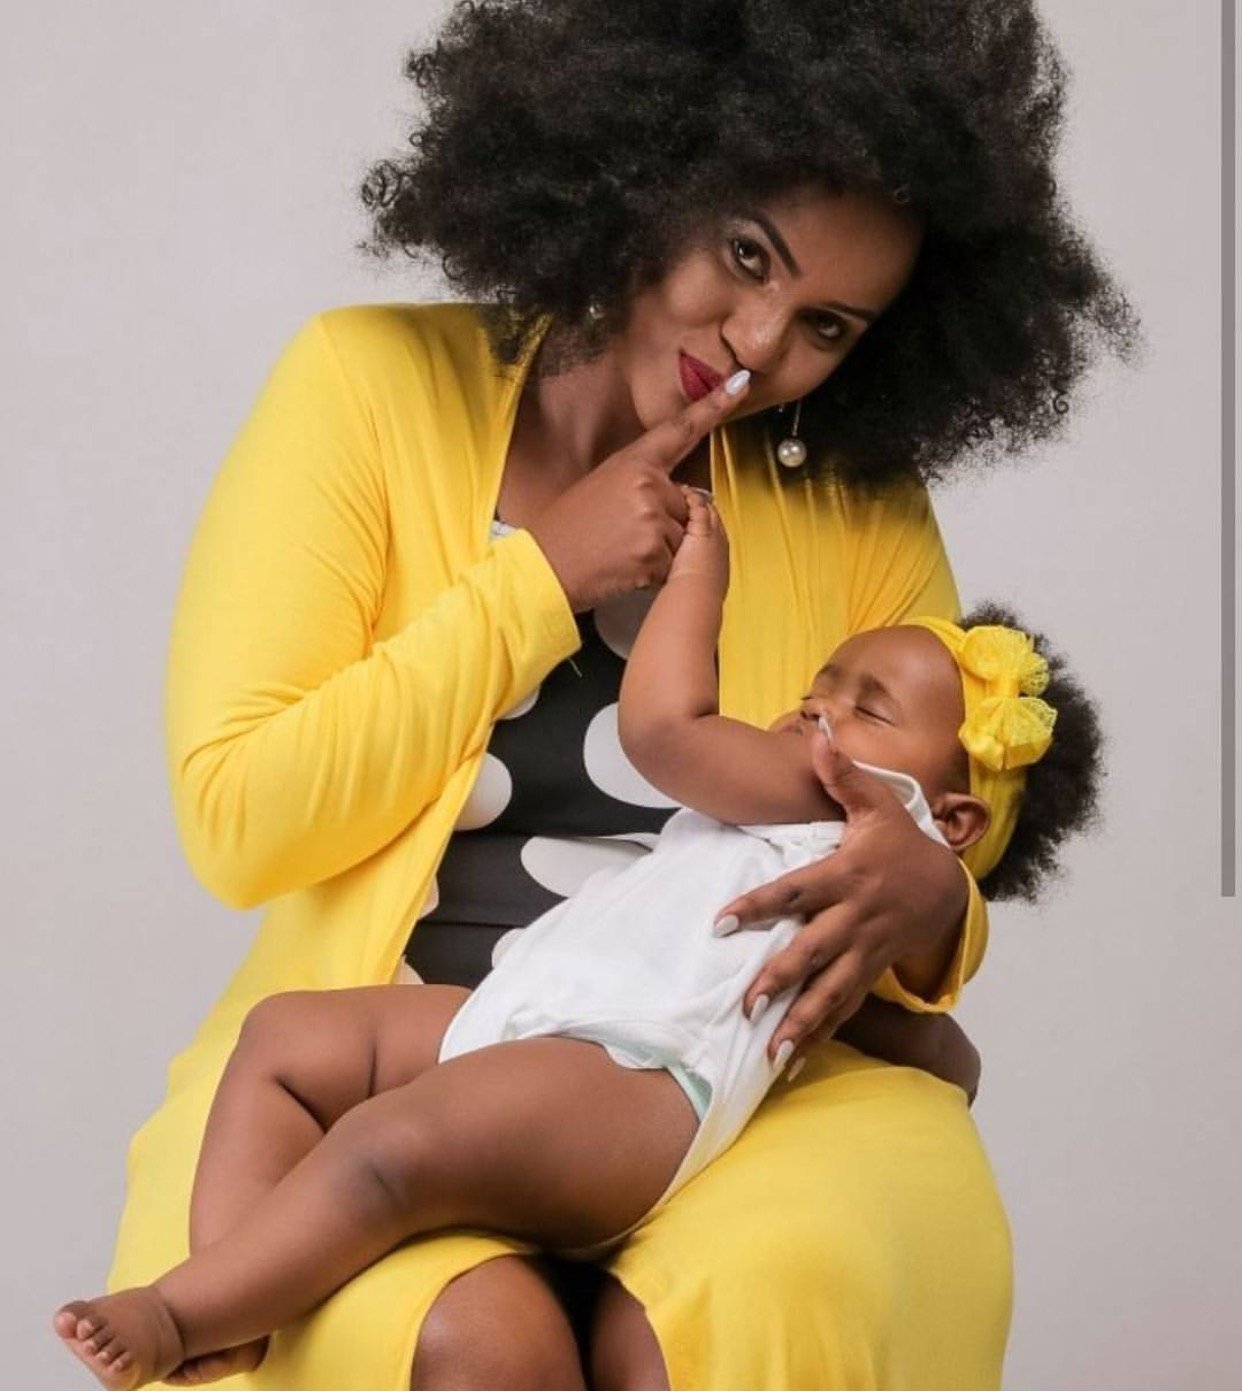 Pierra Makena: “Having this baby was the best decision I ever made!”